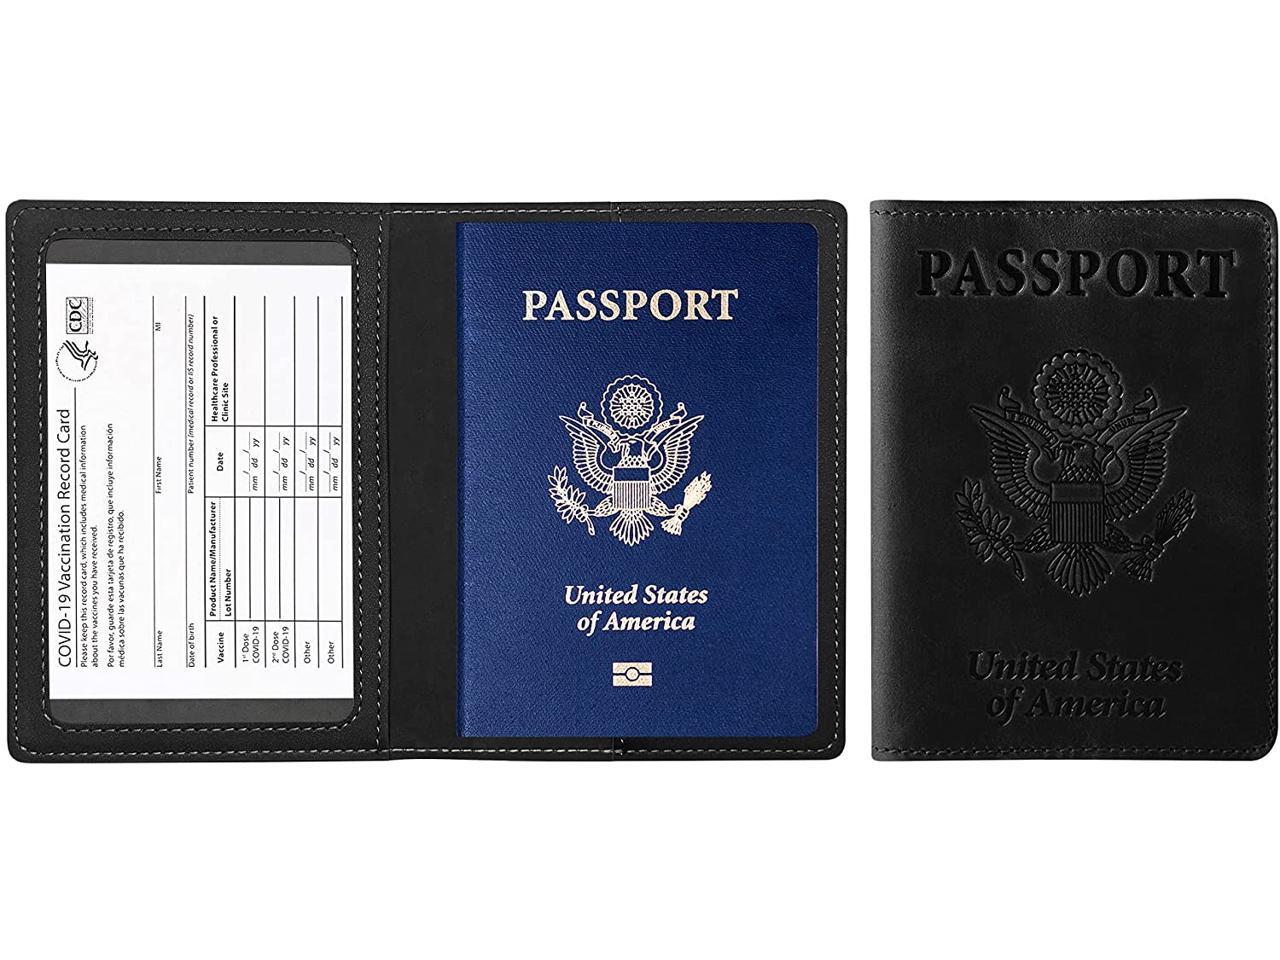 Waterproof Passport Cover With Vaccination Card Slot+Clear Plastic CDC Vaccine Card Protector Set 2 Pack PU Leather Passport and Vaccine Card Holder Combo Black+Burgundy 